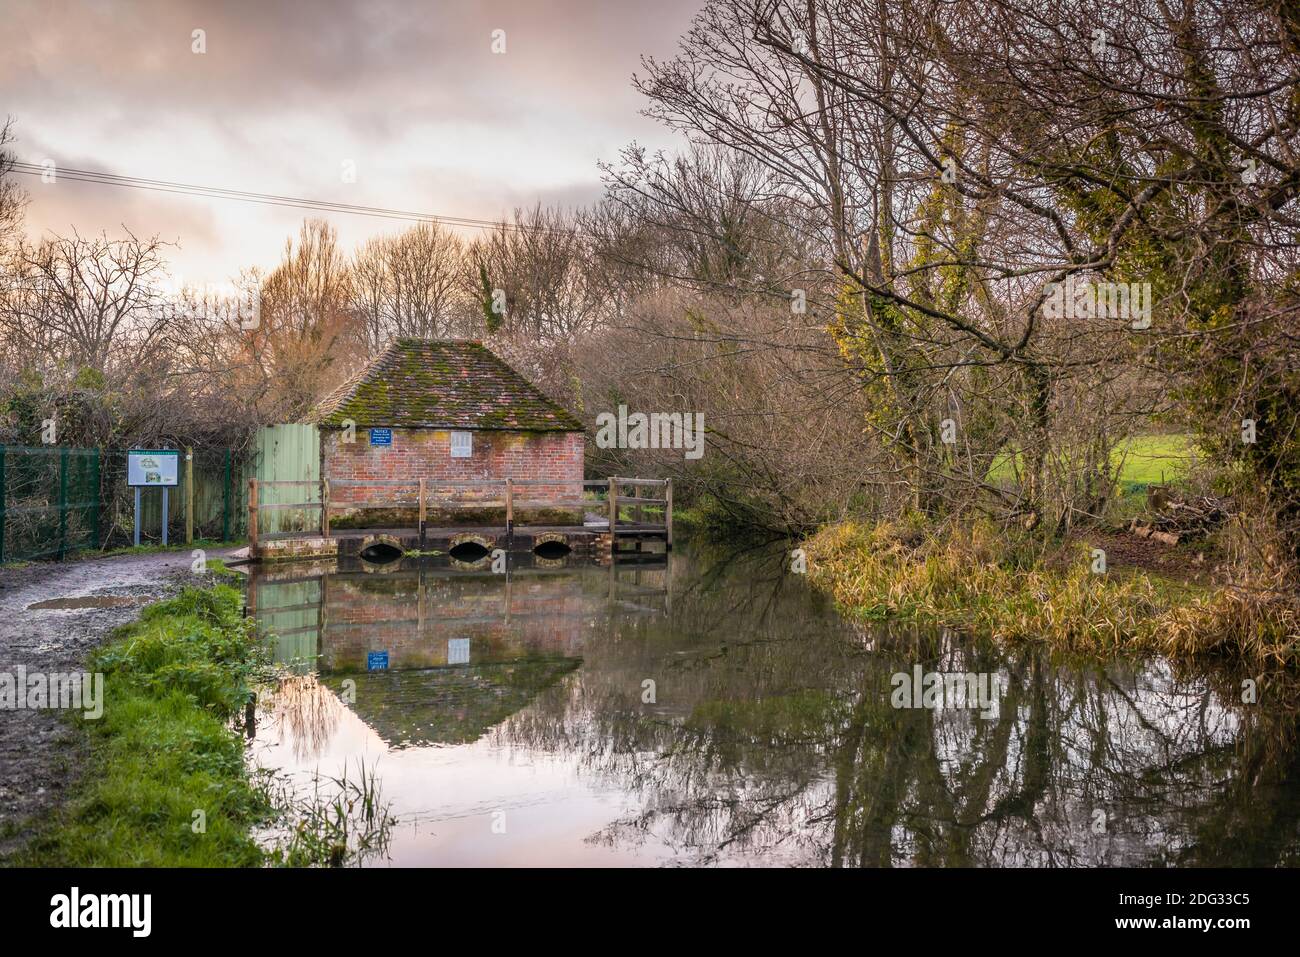 The Eel House at the Alre River along the Alre Valley Trail in the countryside surrounding New Alresford, Hampshire, England, UK Stock Photo